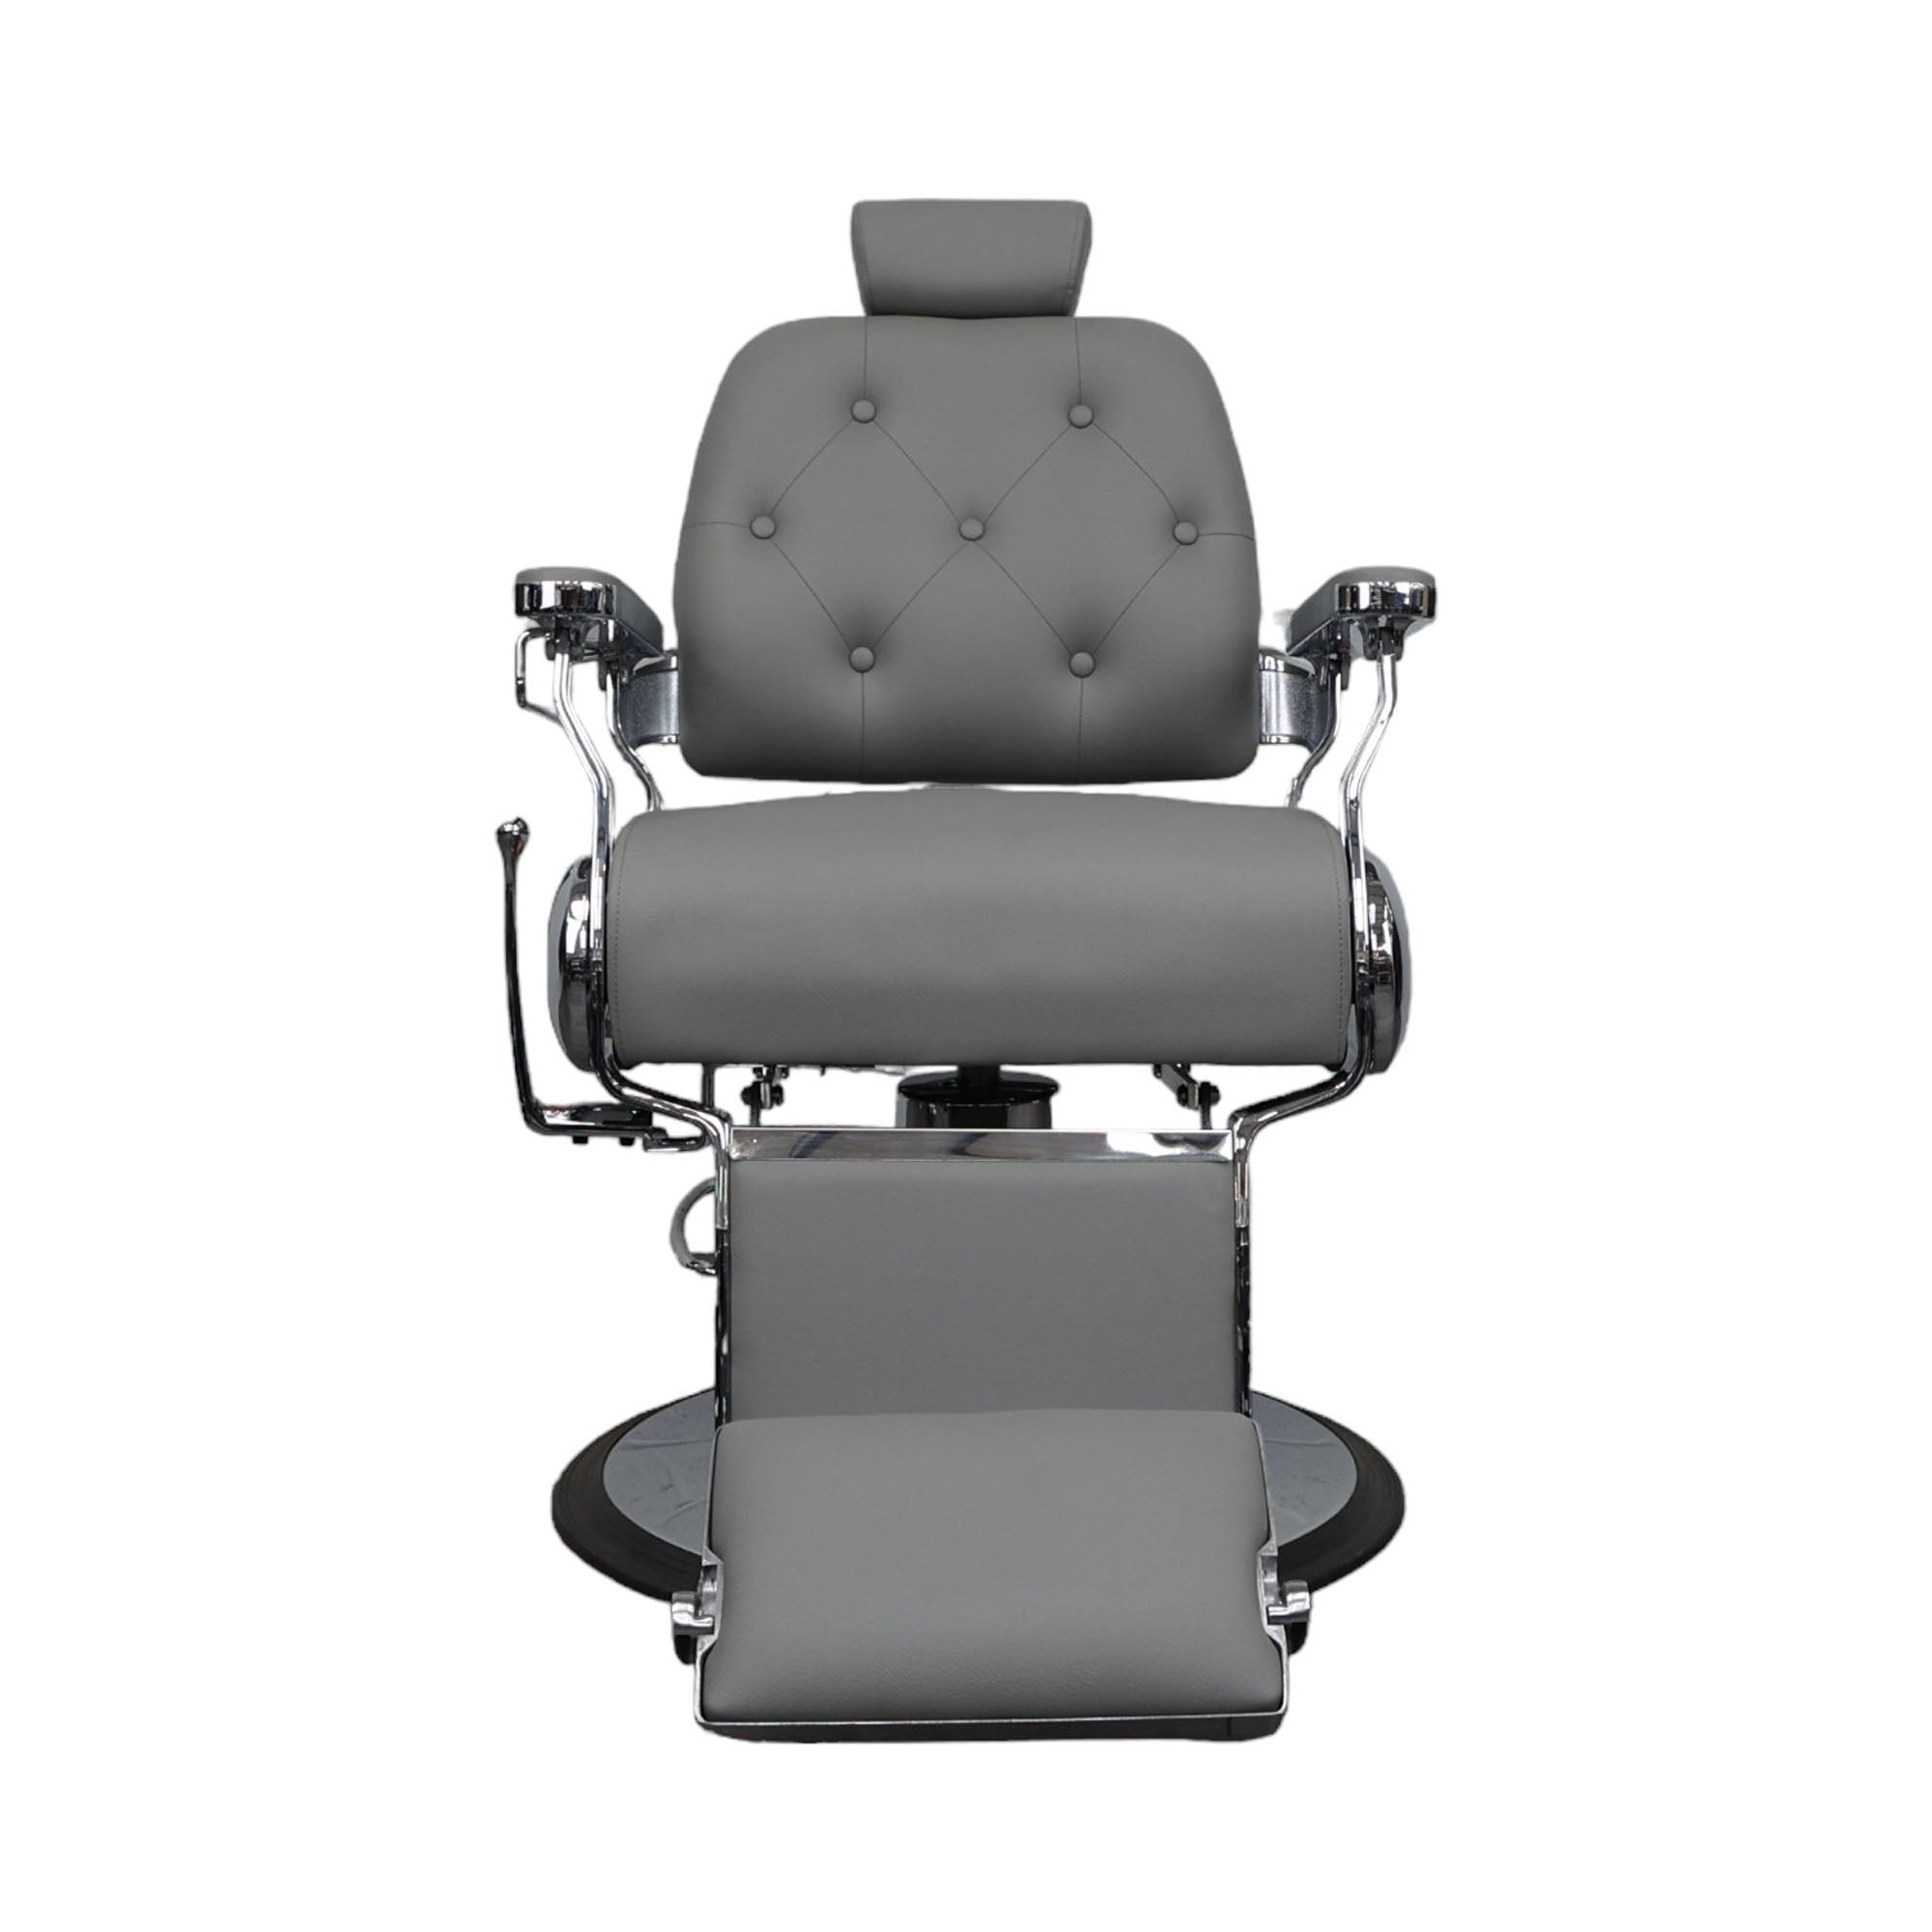 Barber Chair - Luxurious Grey Leather with Crome Accents